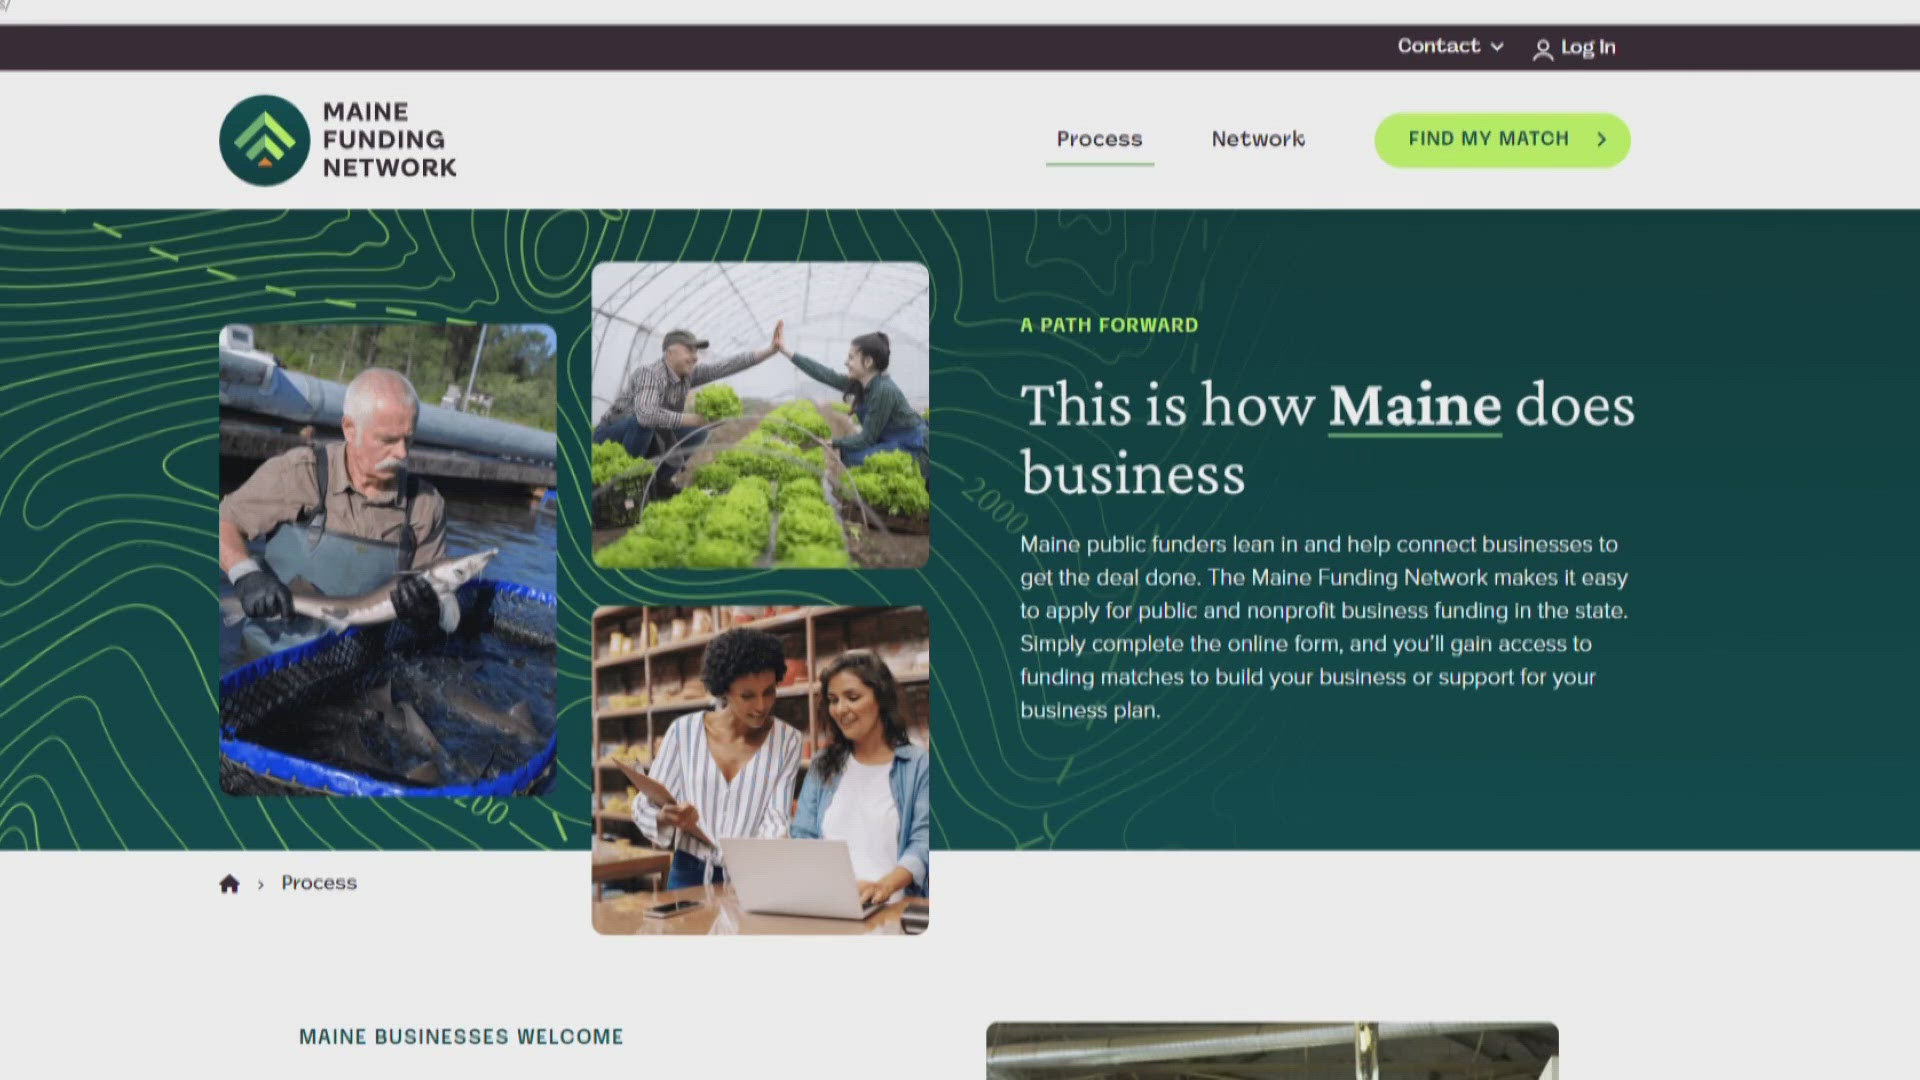 The Maine Funding Network is an online portal that connects businesses with public and non-profit funding providers.